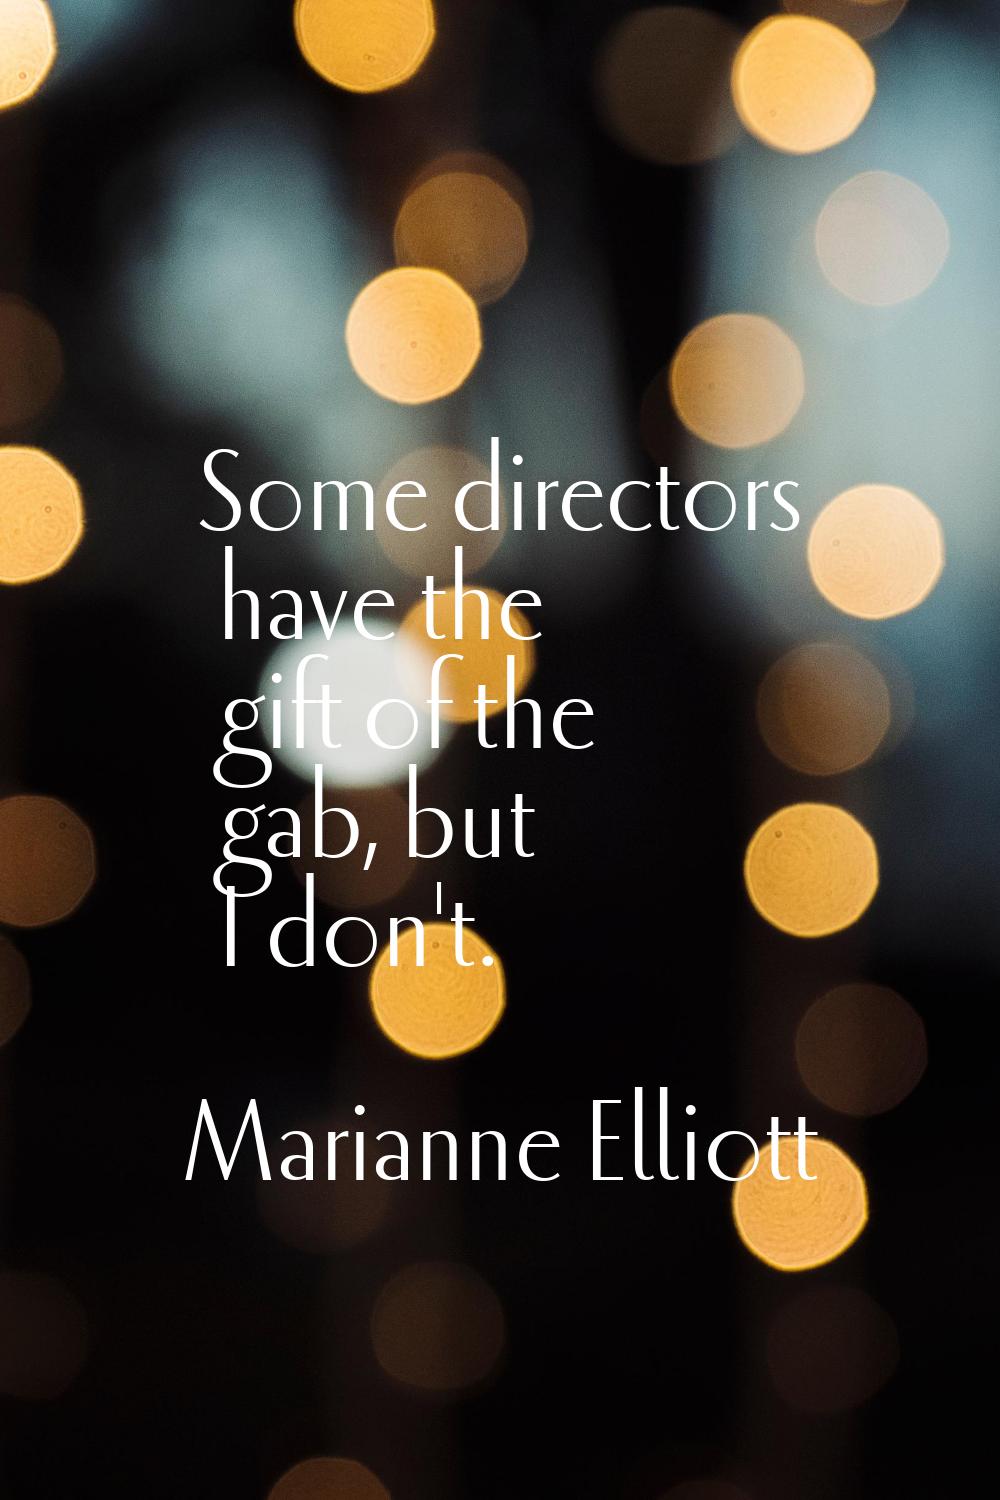 Some directors have the gift of the gab, but I don't.